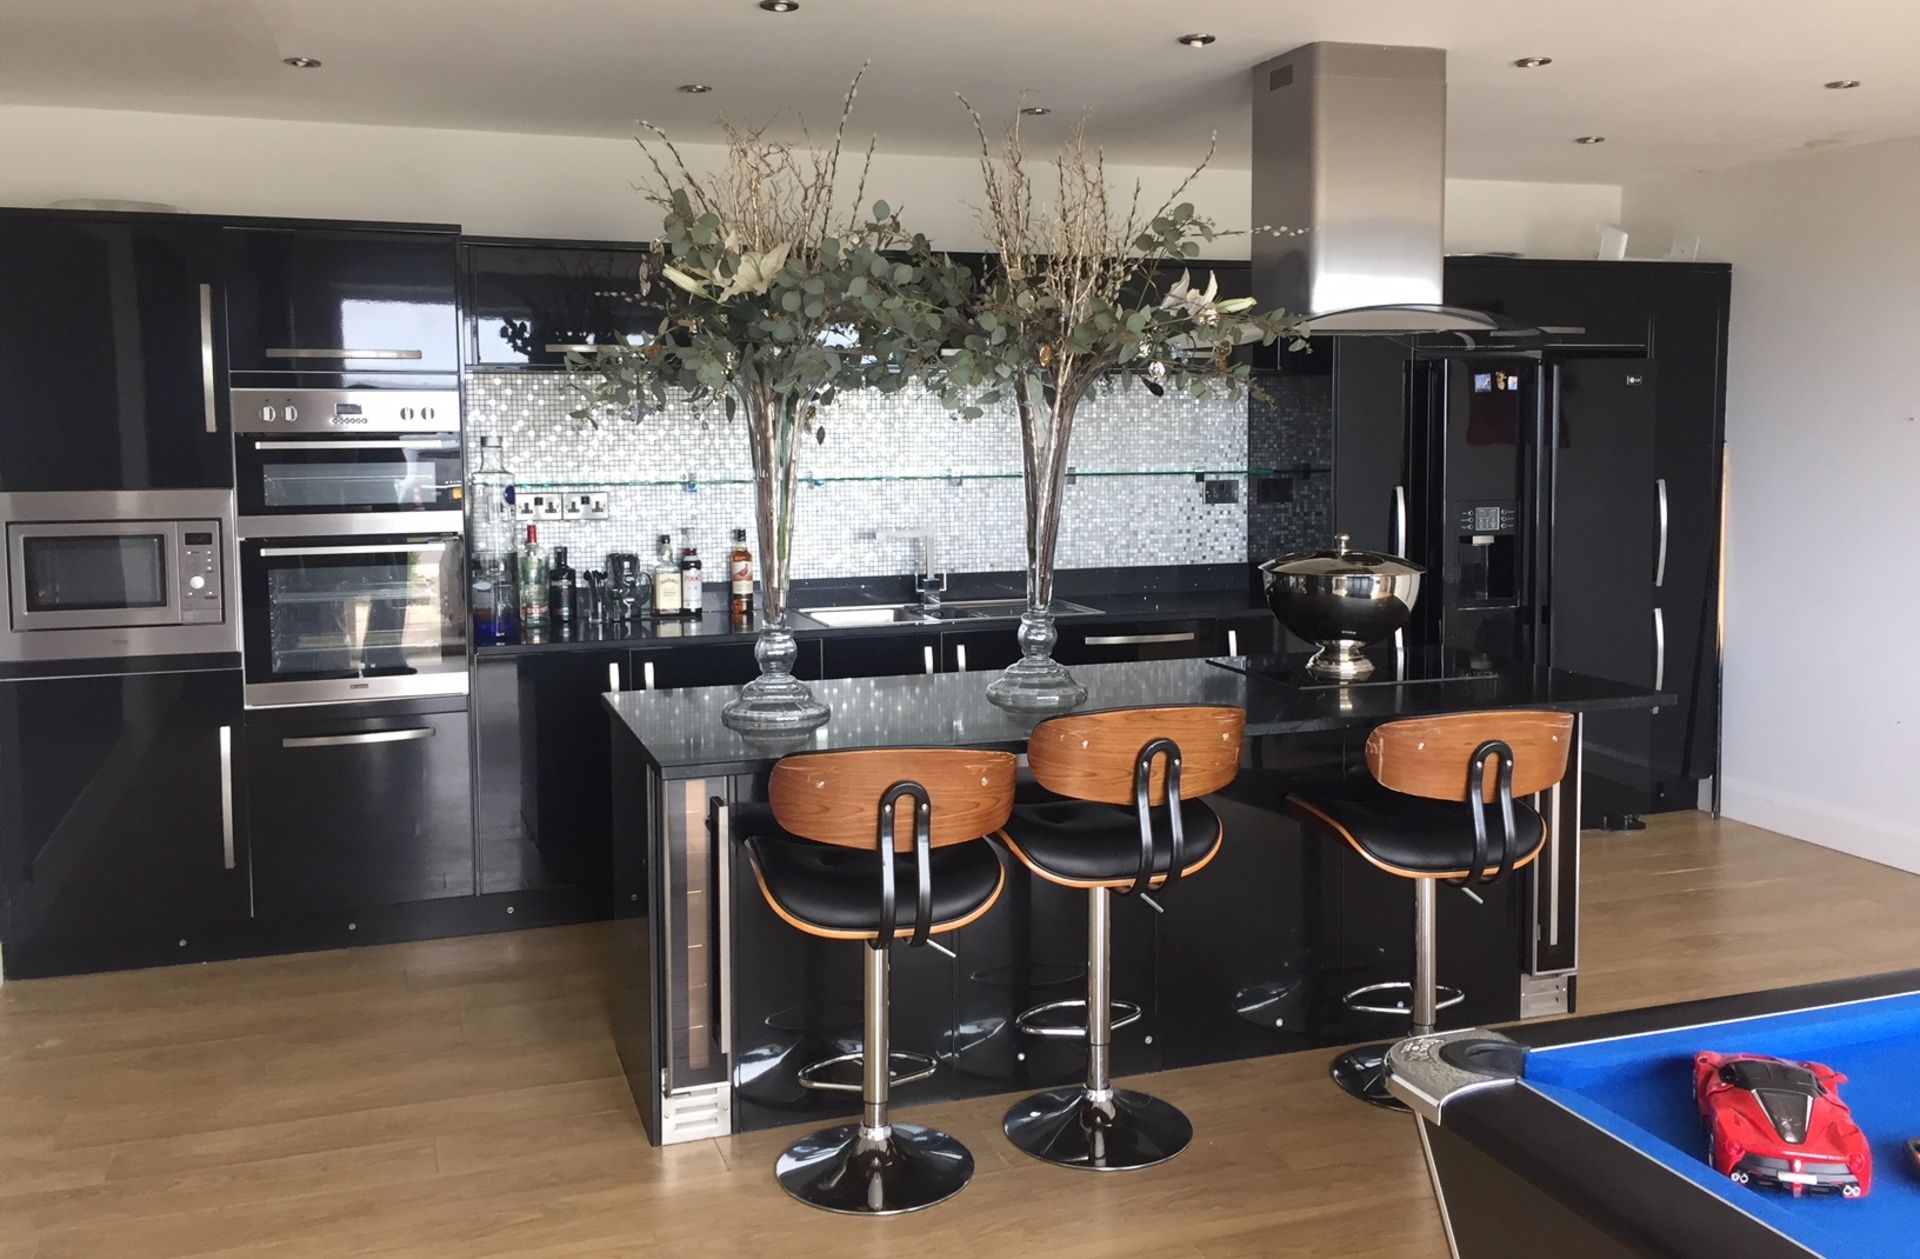 1 x Bespoke Kitchen in Black with Granite Worktops and a Selection of Lamona Appliances - CL508